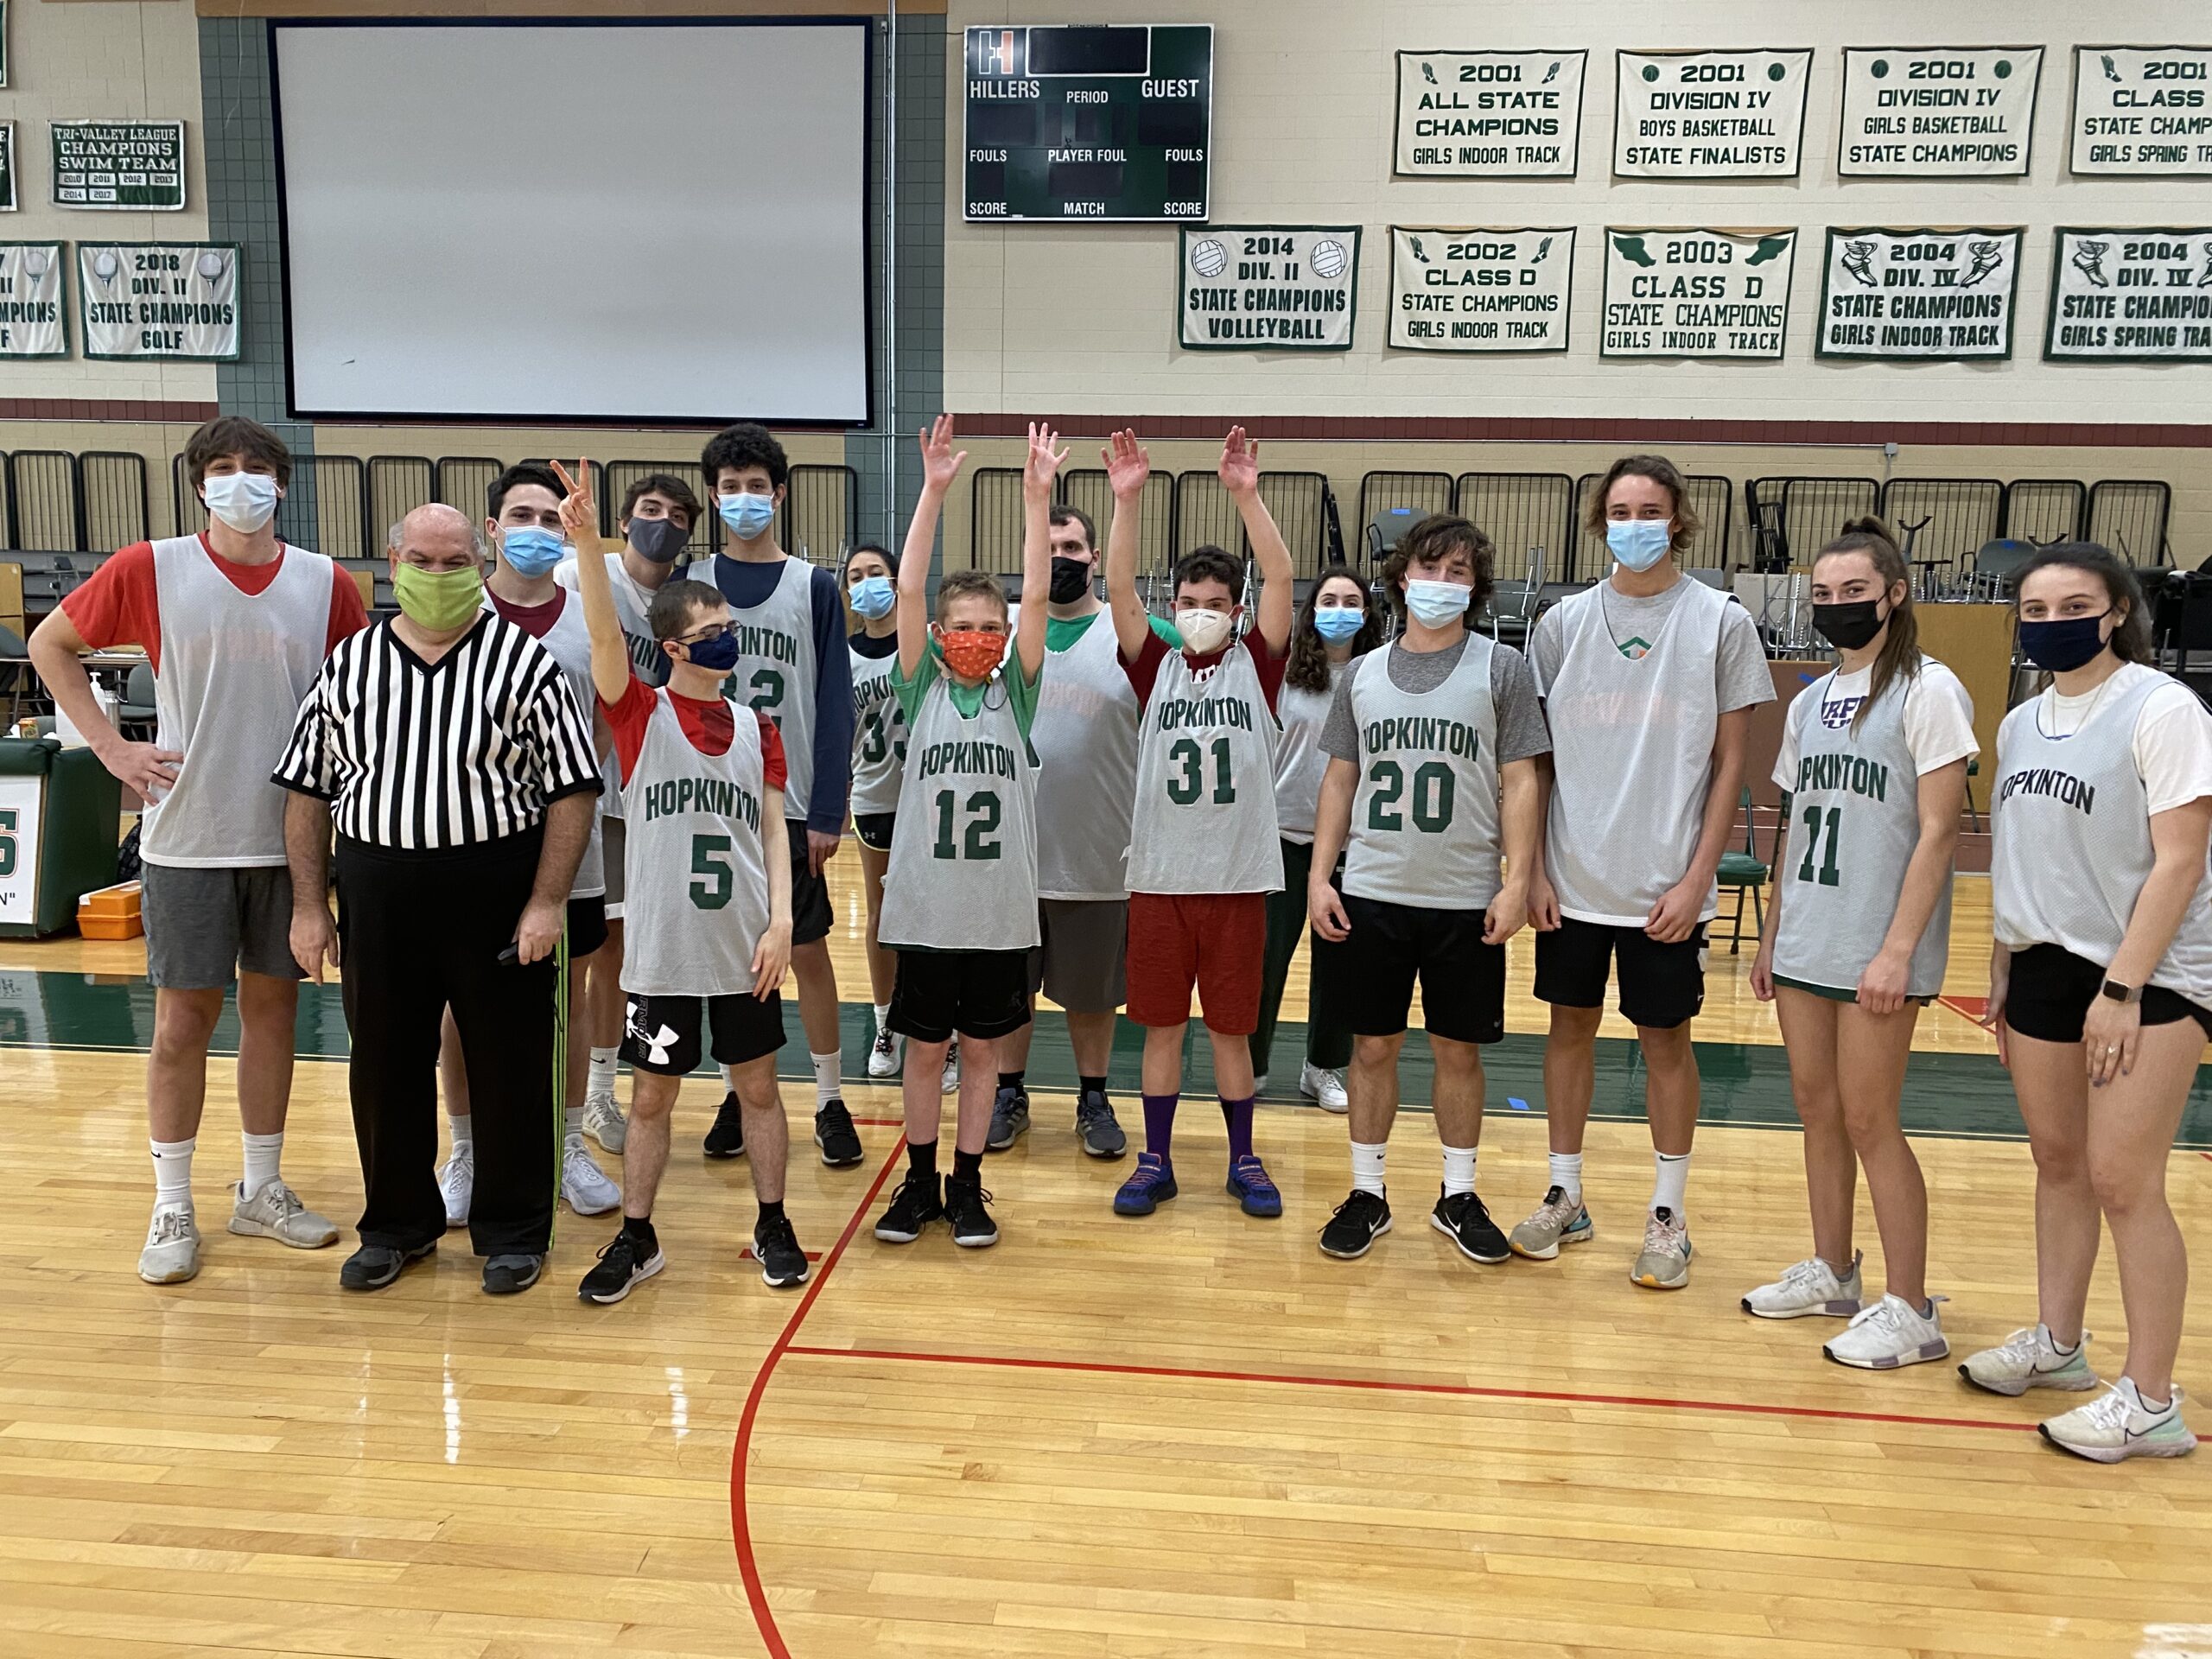 Unified basketball back in Hopkinton